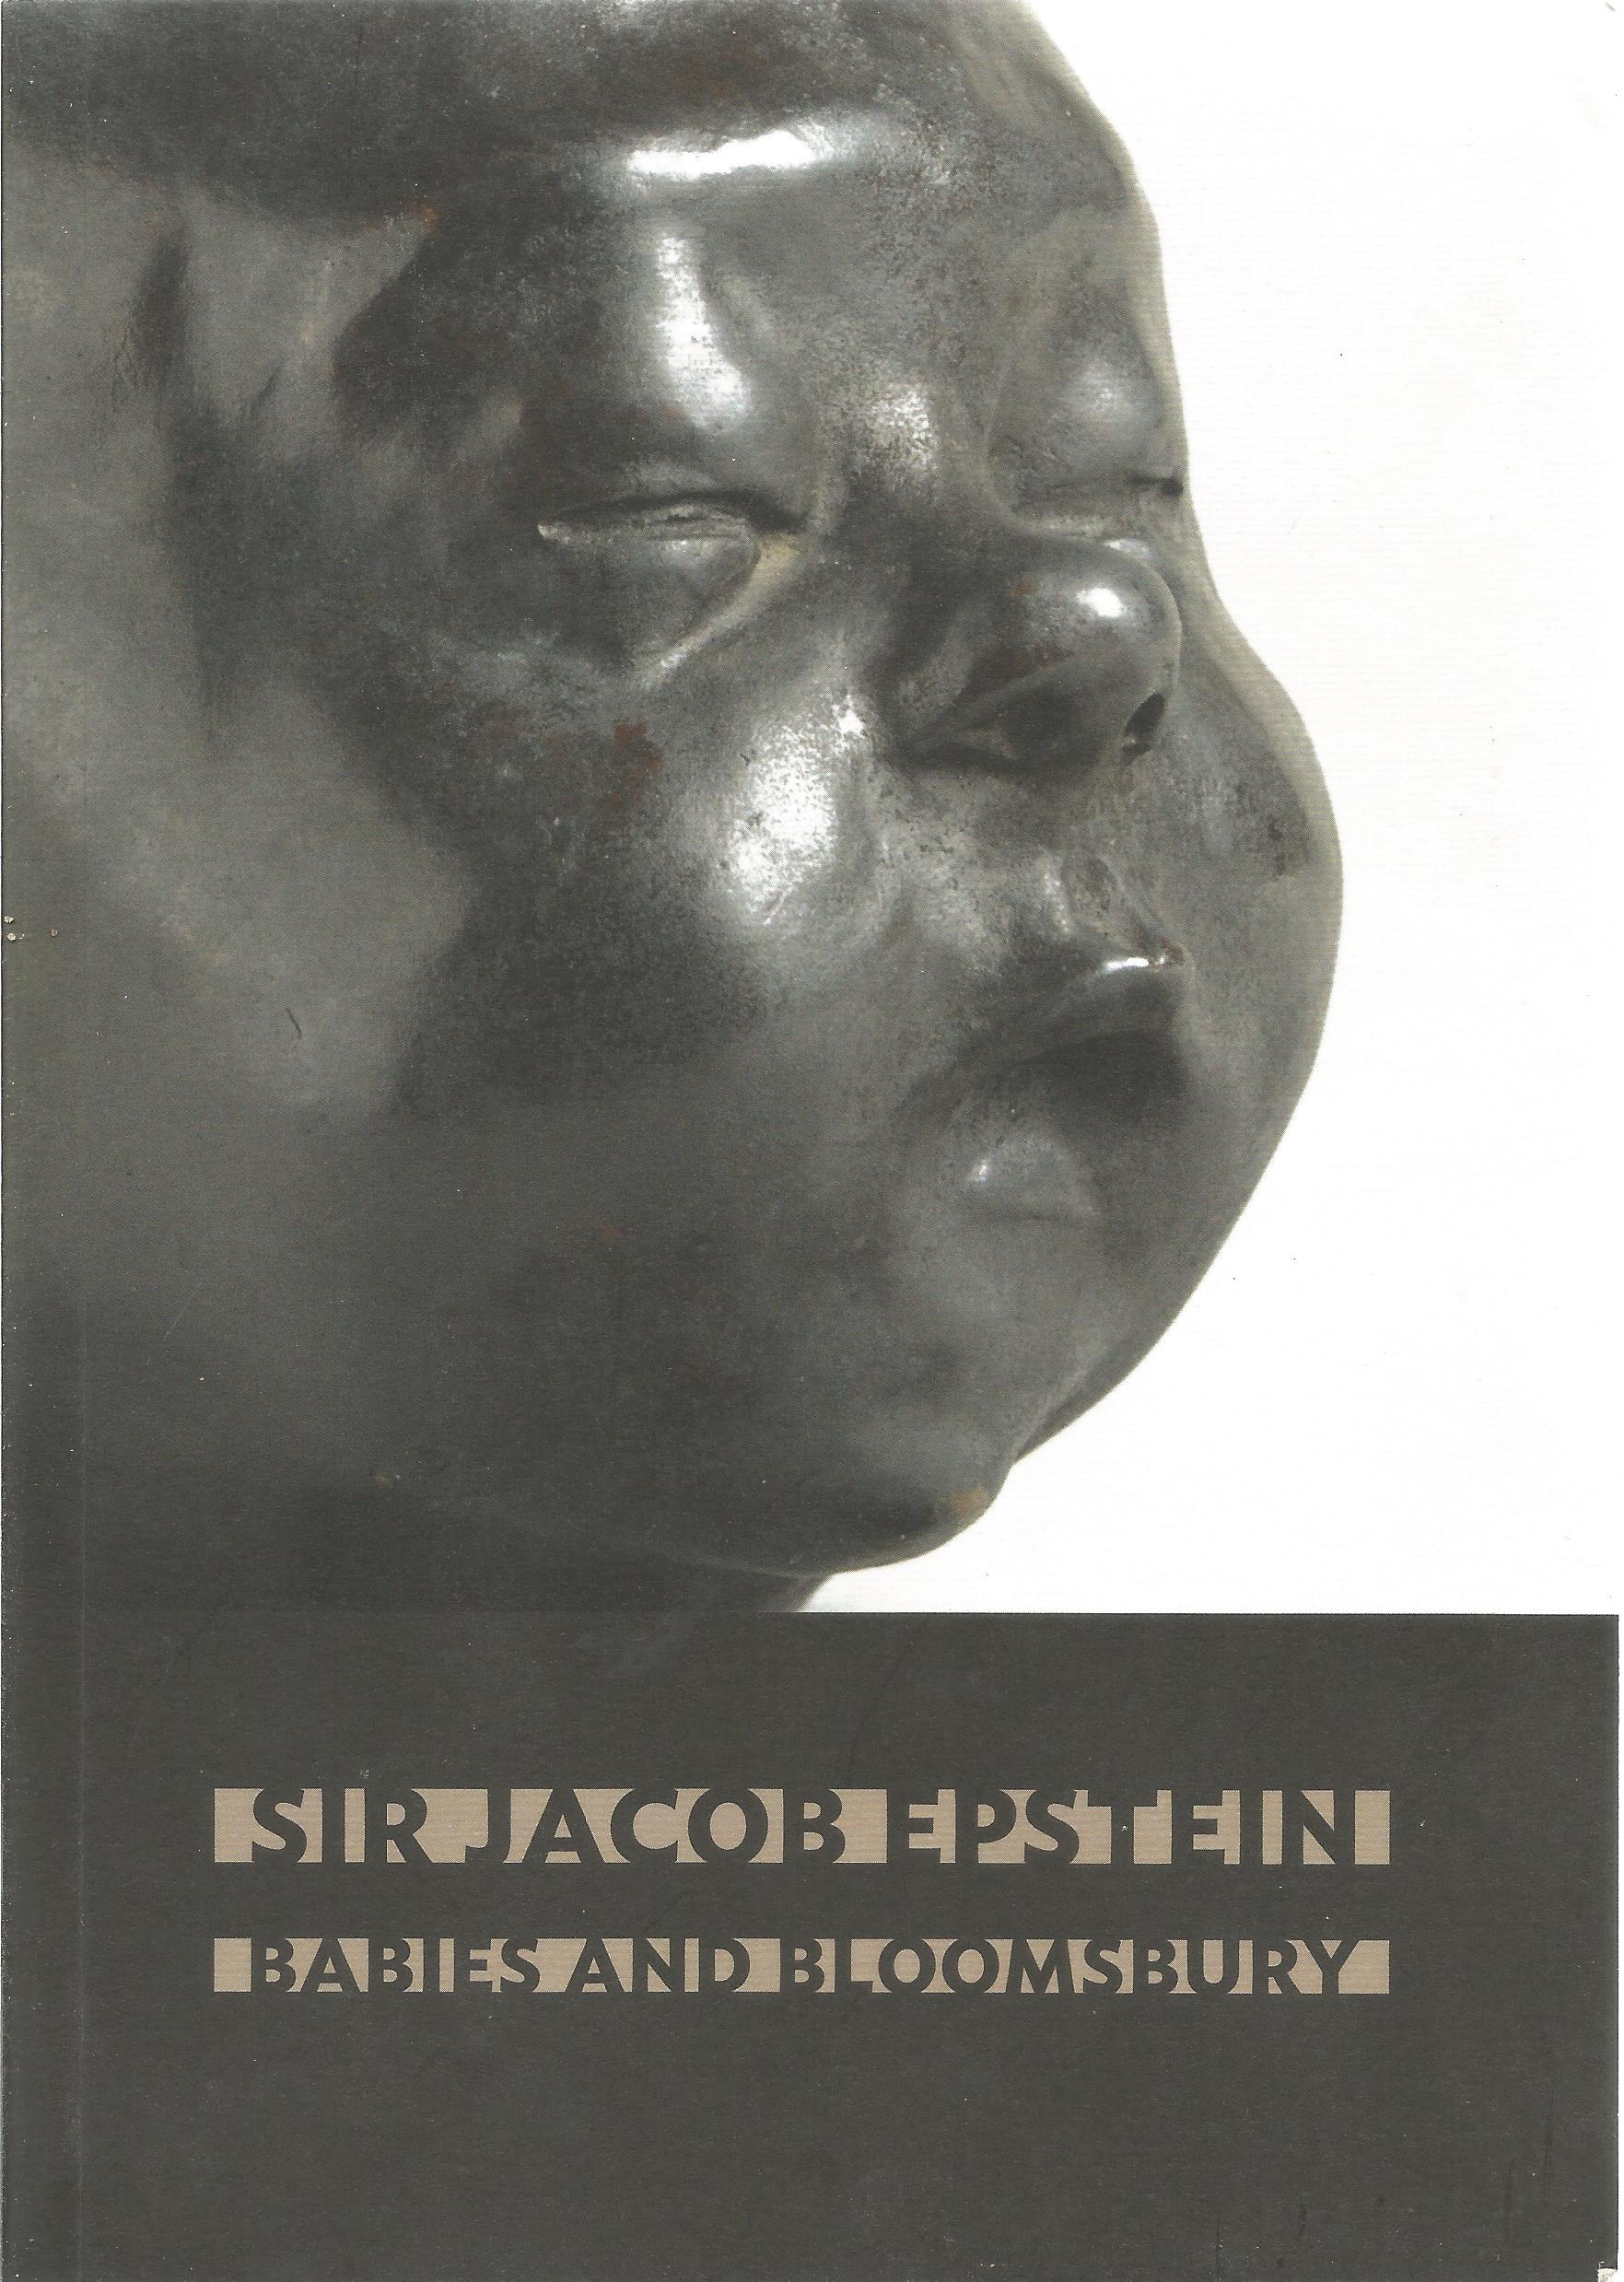 Sir Jacob Epstein Babies and Bloomsbury edited by Gill Hedley 2015 Softback Book published by The